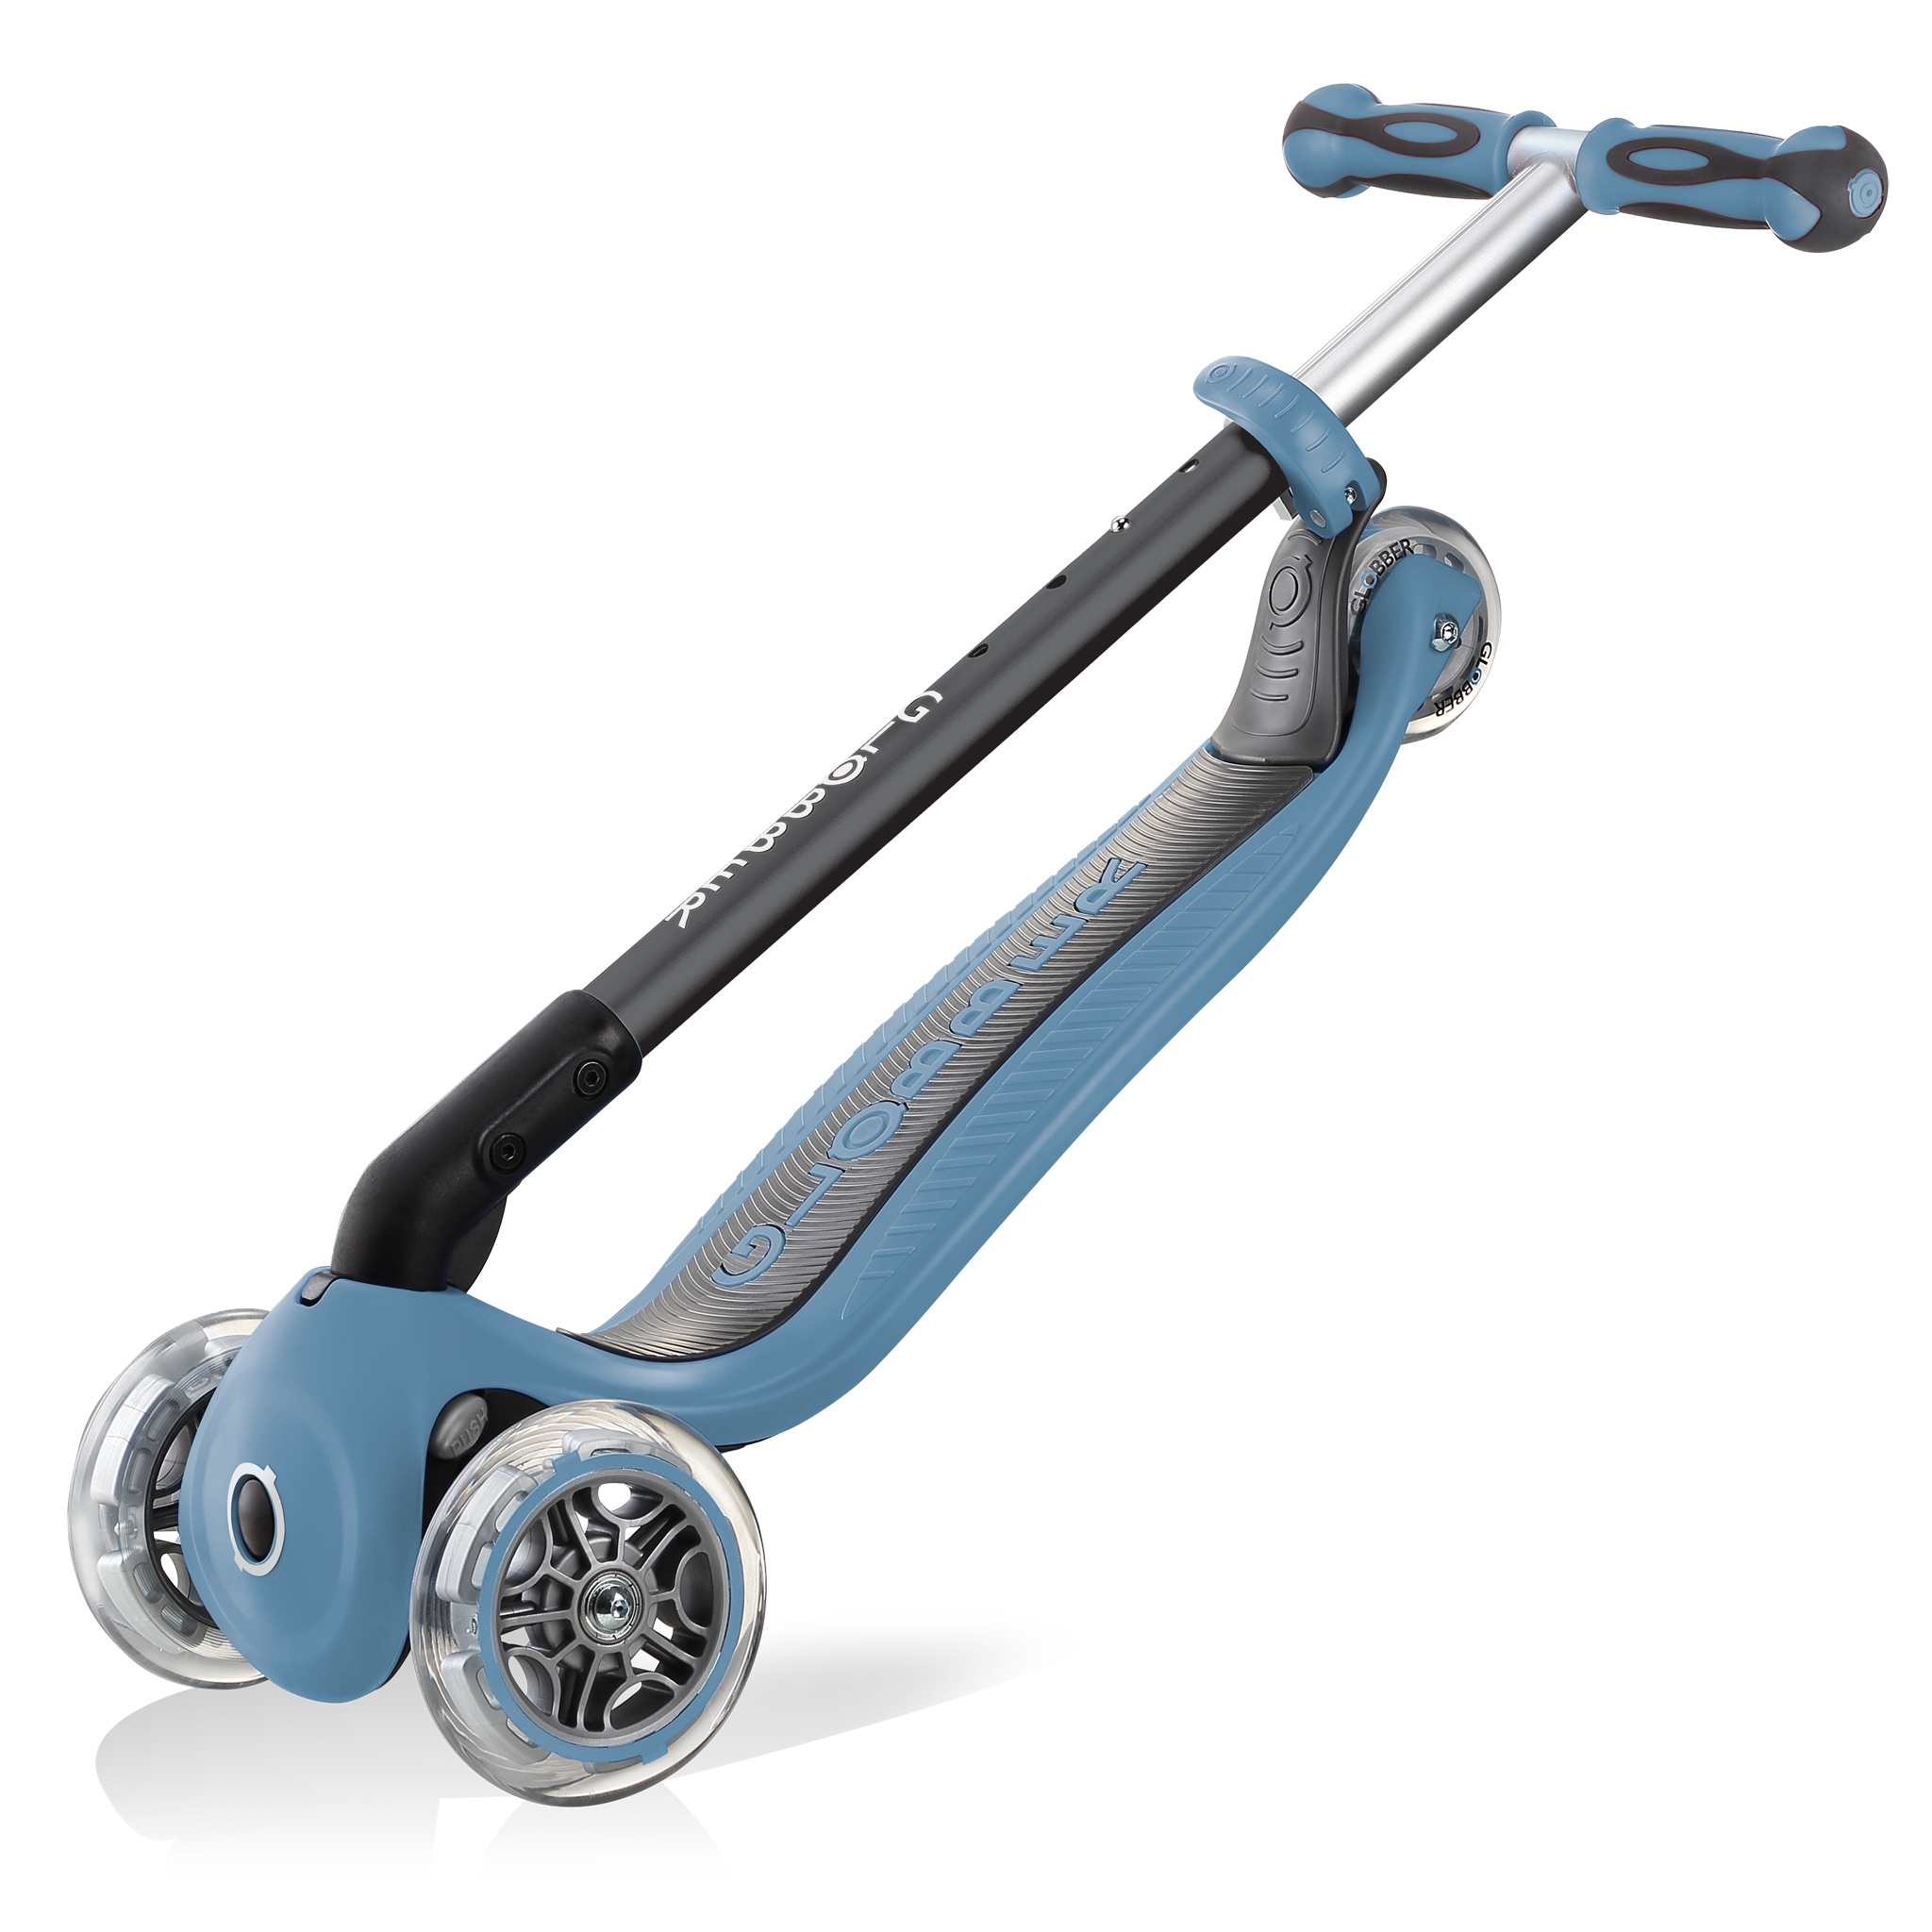 GO-UP-DELUXE-PLAY-ride-on-walking-bike-scooter-with-light-and-sound-module-trolley-mode-compatible-ash-blue 5